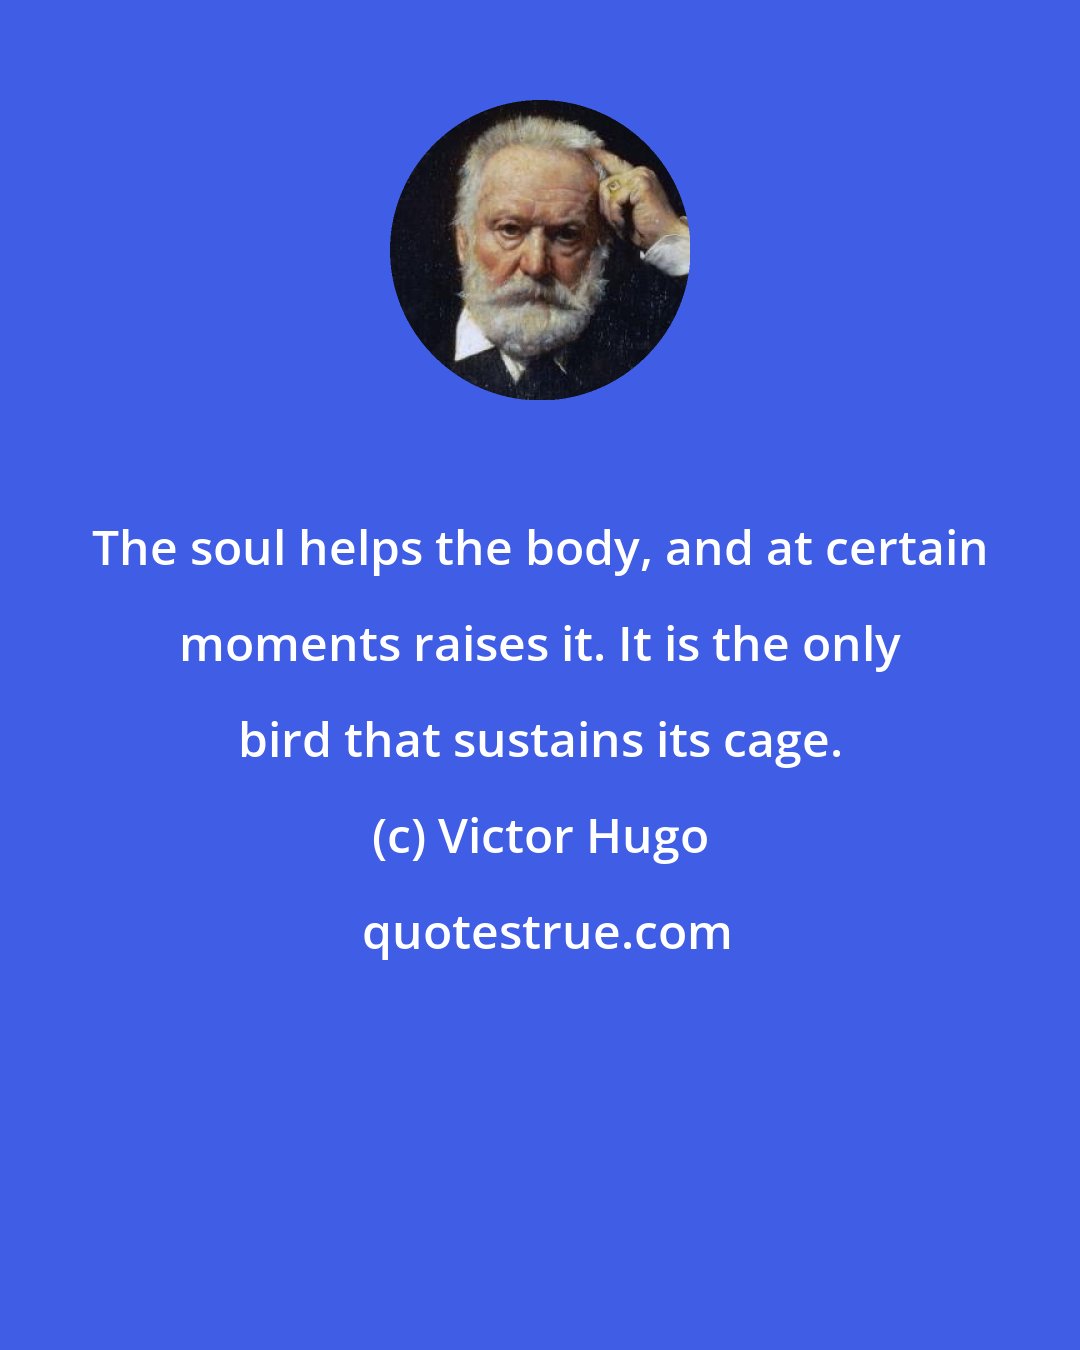 Victor Hugo: The soul helps the body, and at certain moments raises it. It is the only bird that sustains its cage.